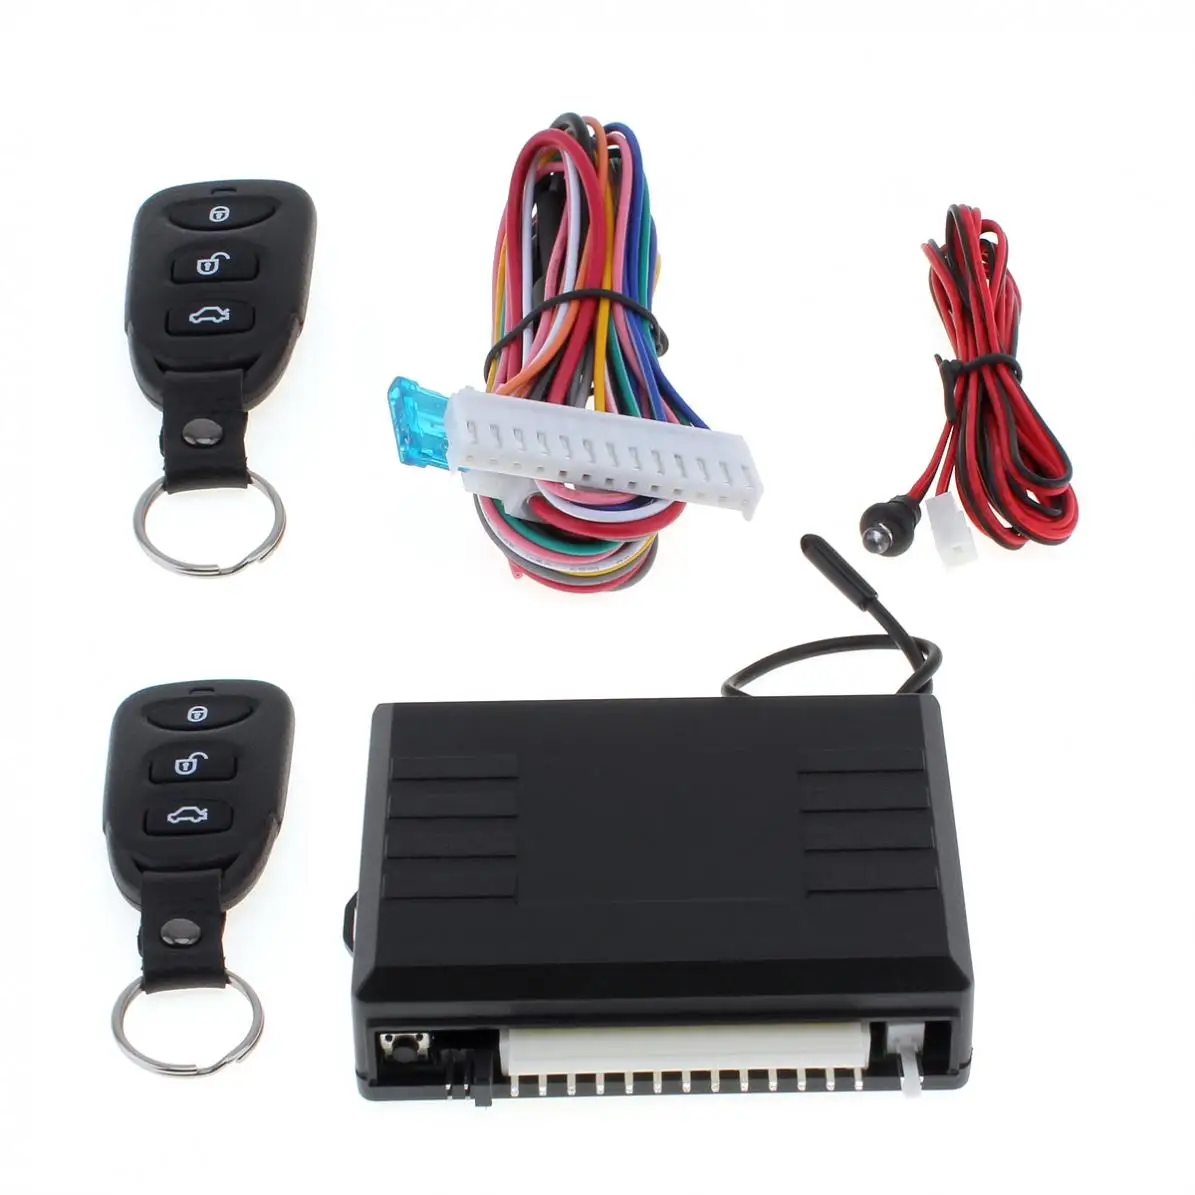 

Universal Car Alarm Systems Auto Remote Central locking Kit Door Lock Vehicle Keyless Entry System with Remote Control